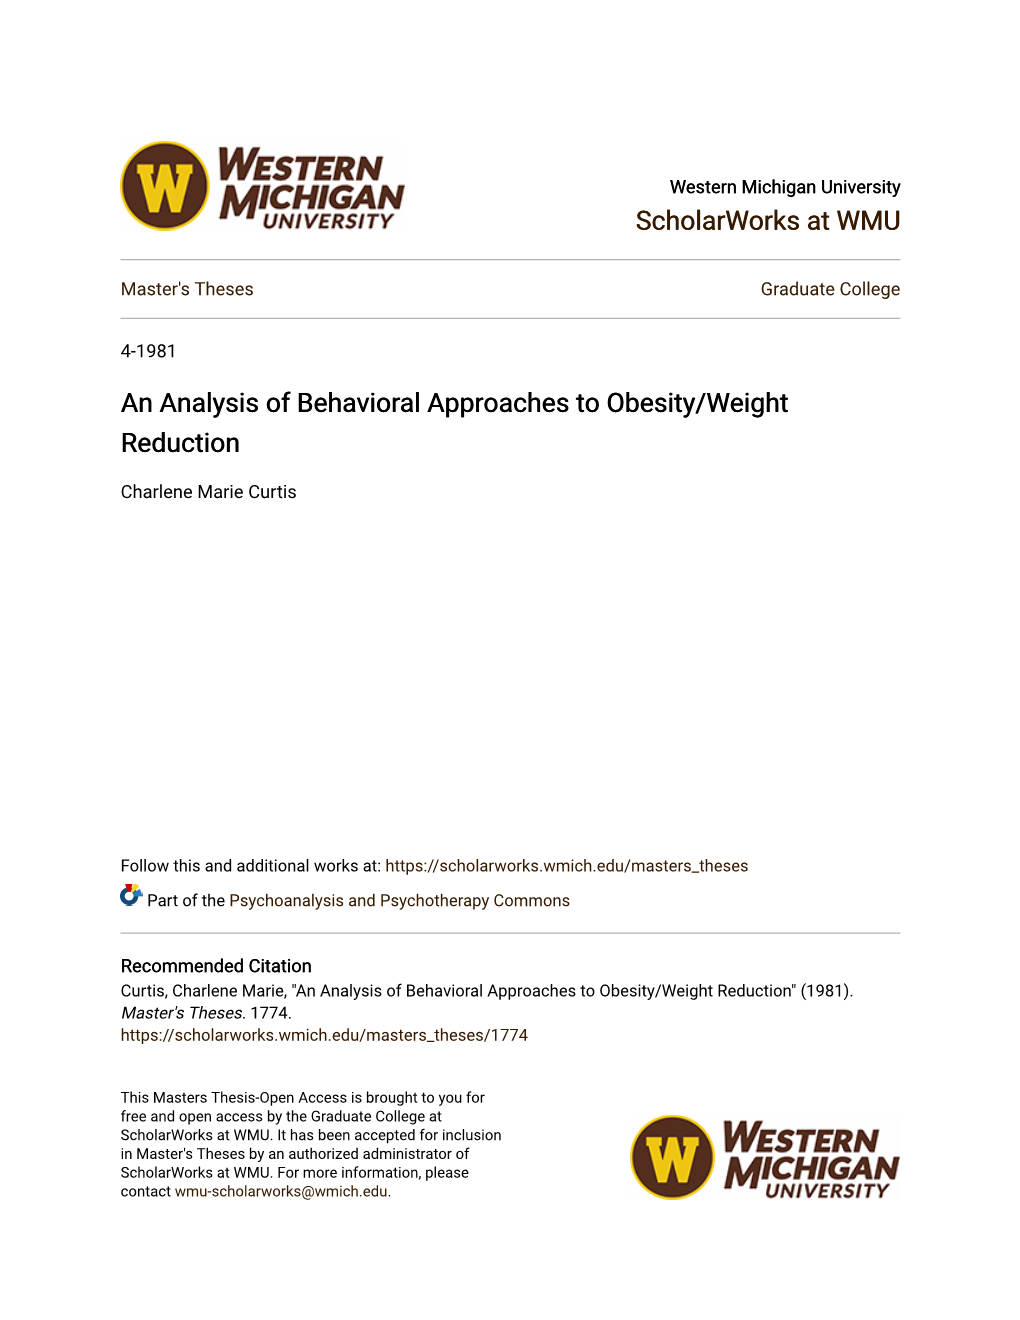 An Analysis of Behavioral Approaches to Obesity/Weight Reduction